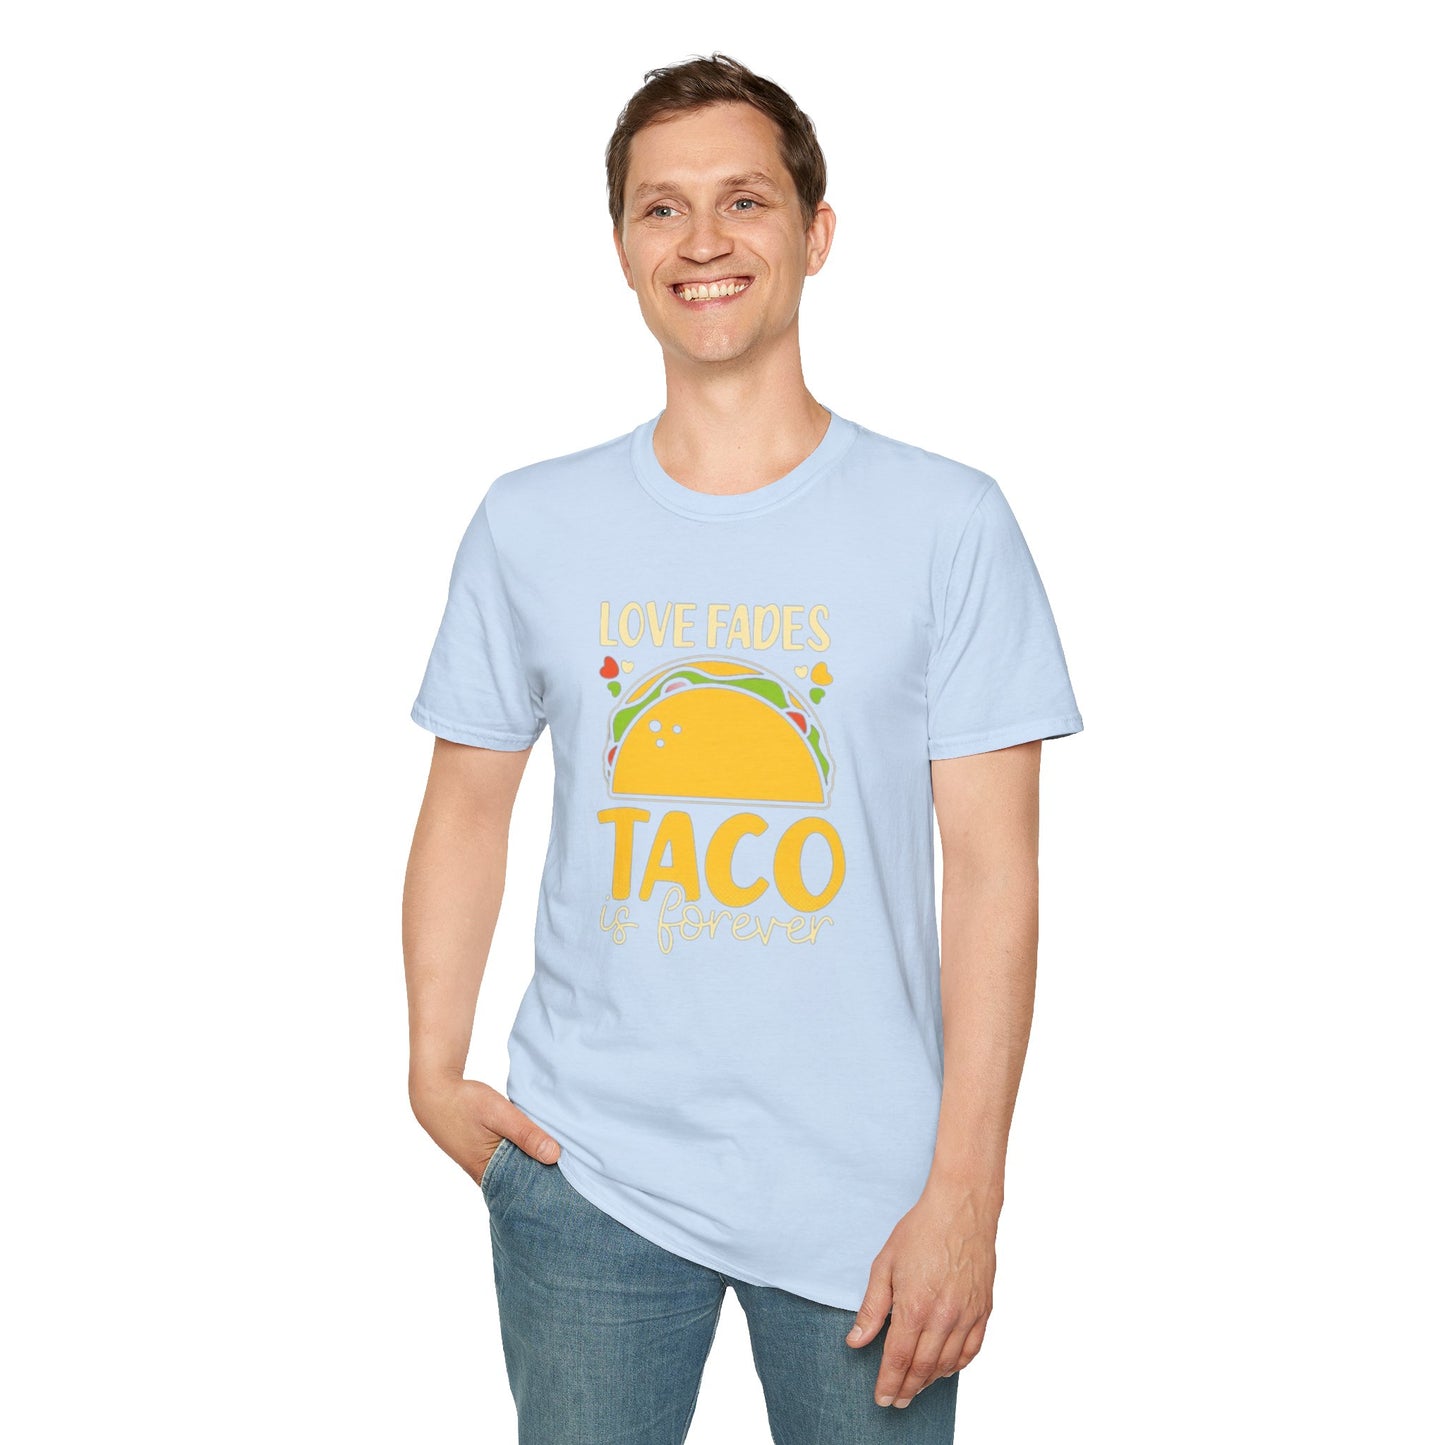 Love fades, Taco is forever - Unisex Softstyle T-Shirt